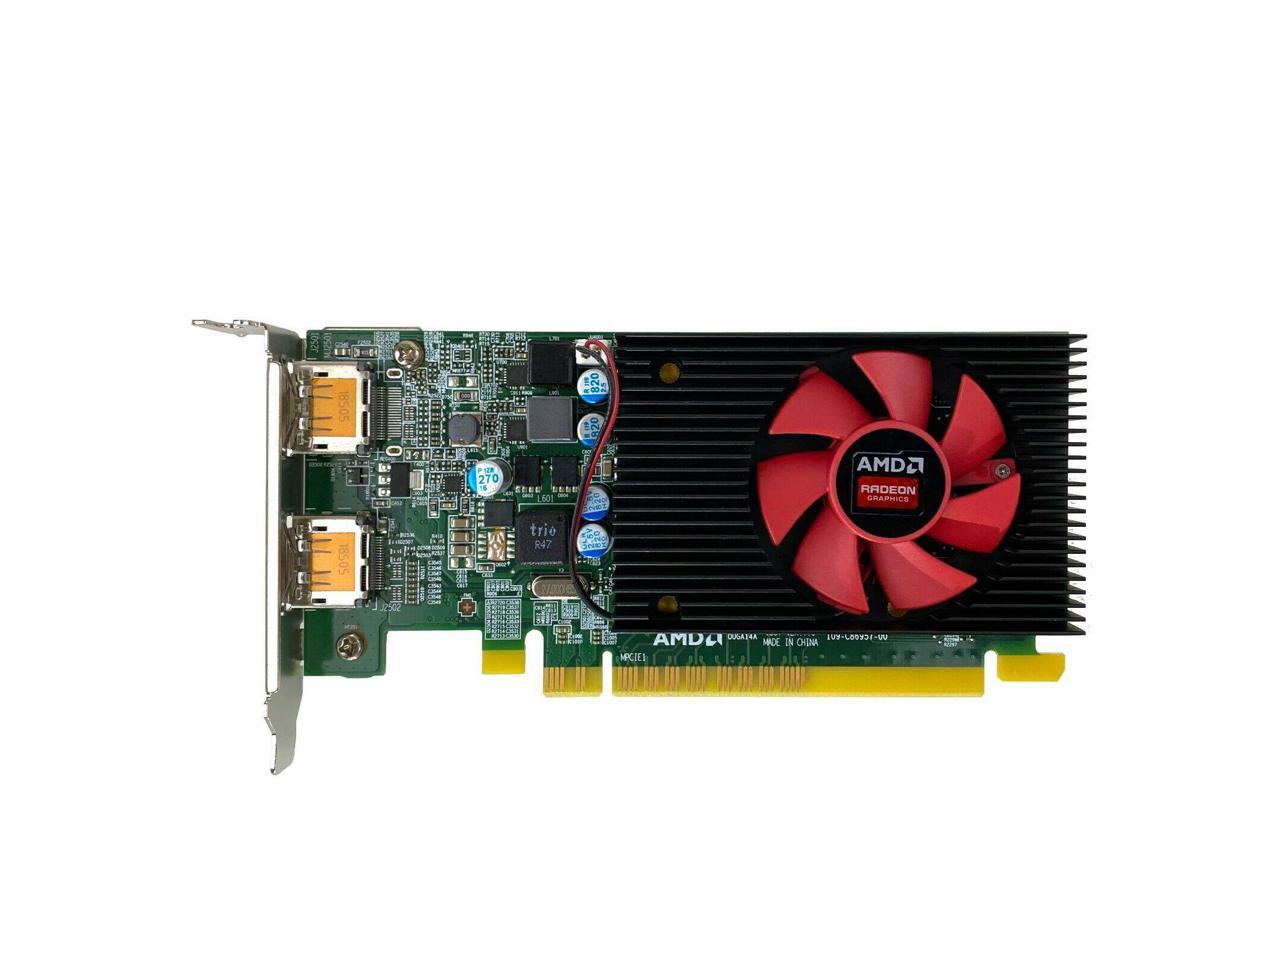 Dell AMD Radeon For DT and SFF R5 430 2 GB DisplayPort+DVI 09VHW0 9VHW0 Graphics Card